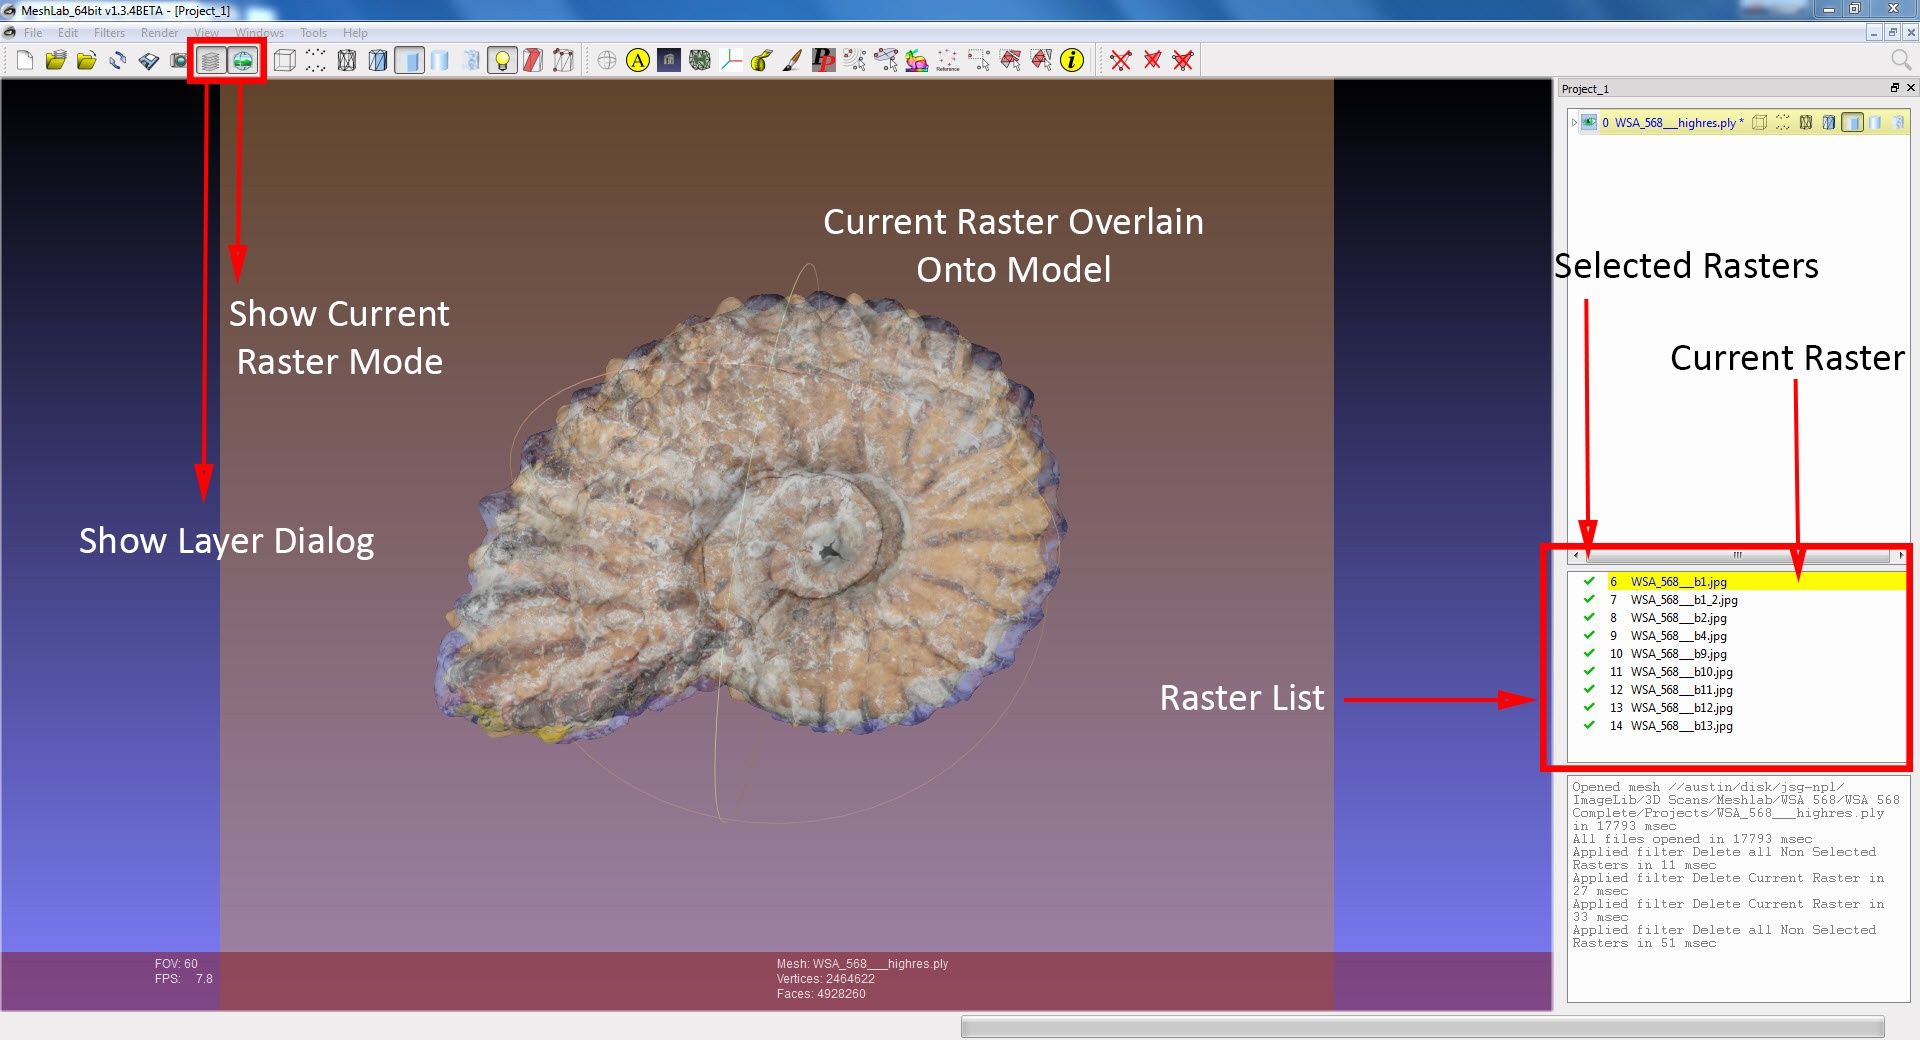 Raster Overview